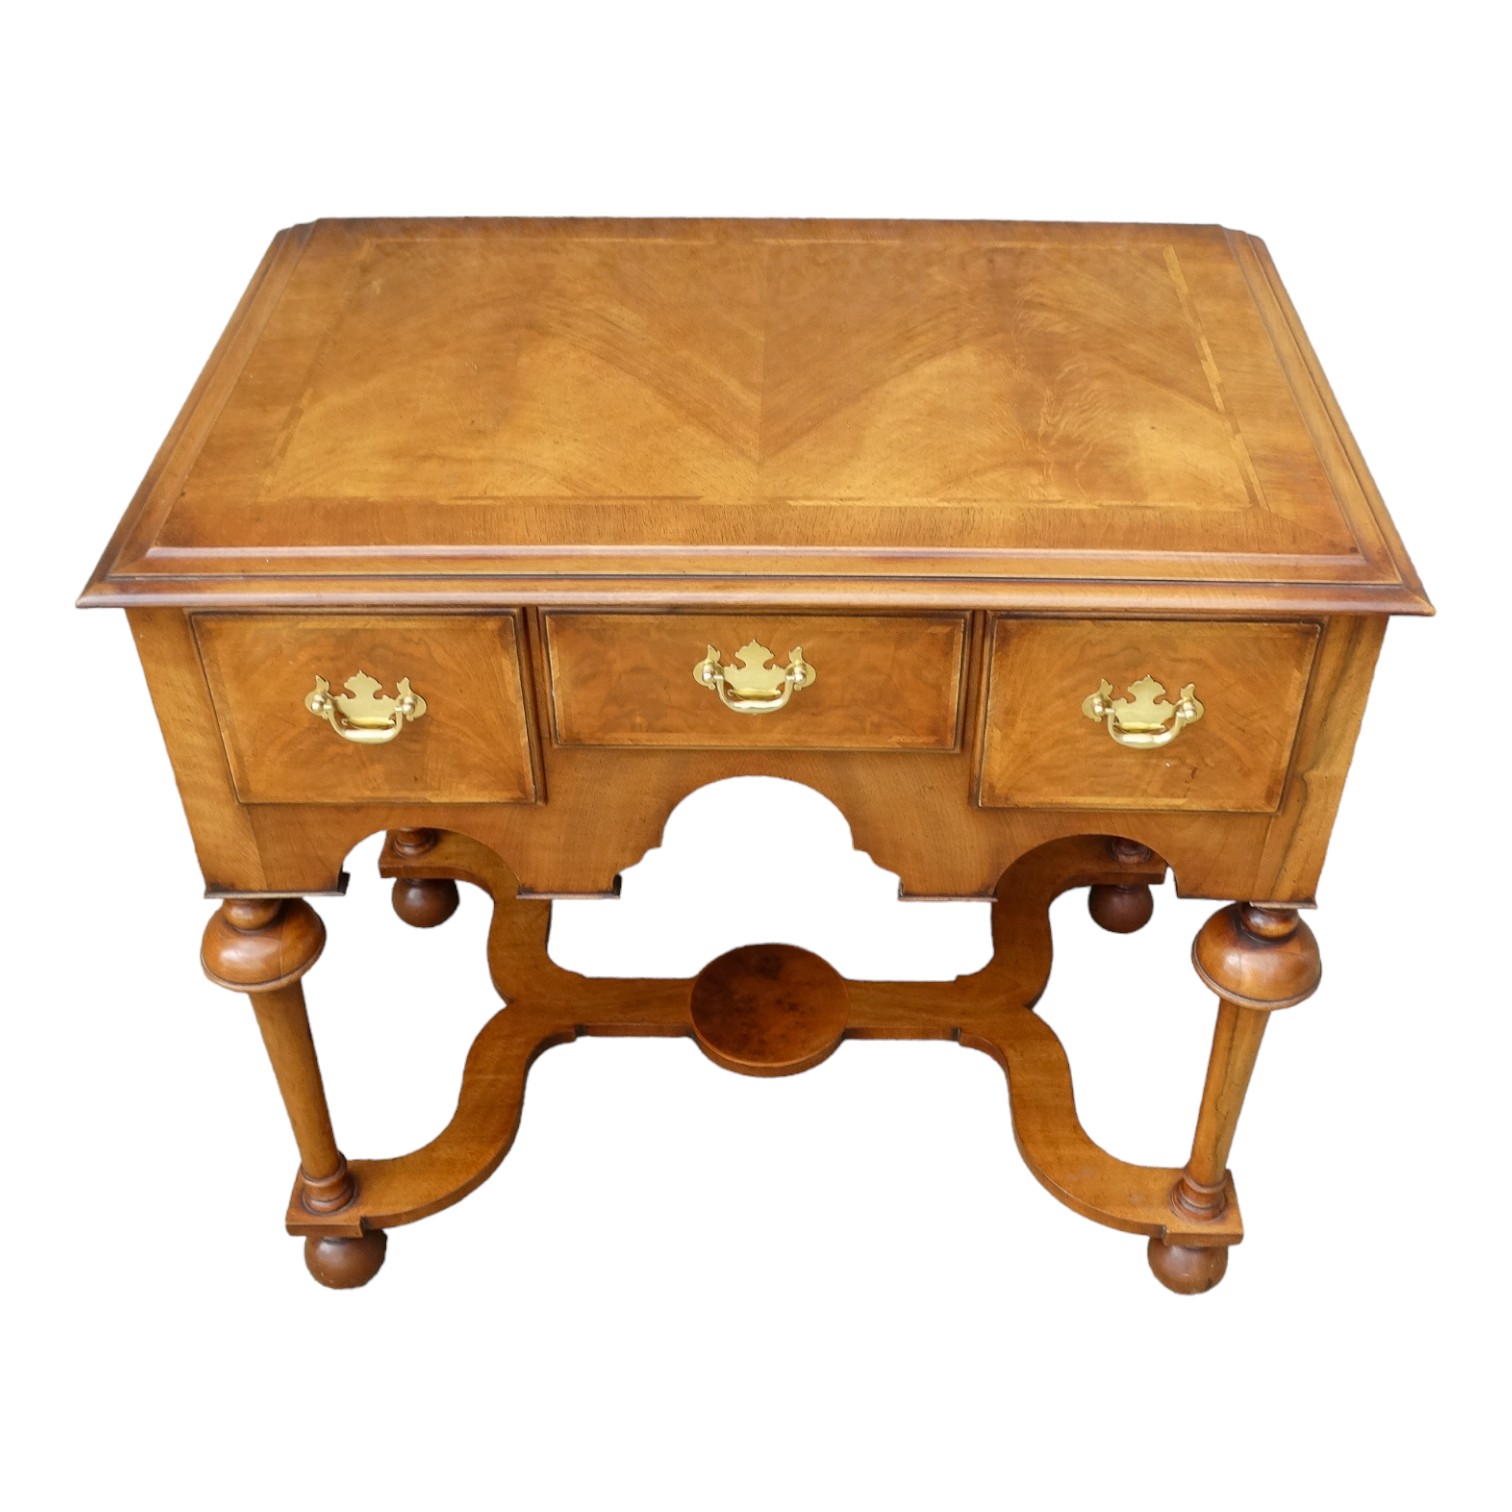 A walnut William and Mary style lowboy - the rectangular moulded top with cross banding above an - Image 2 of 6